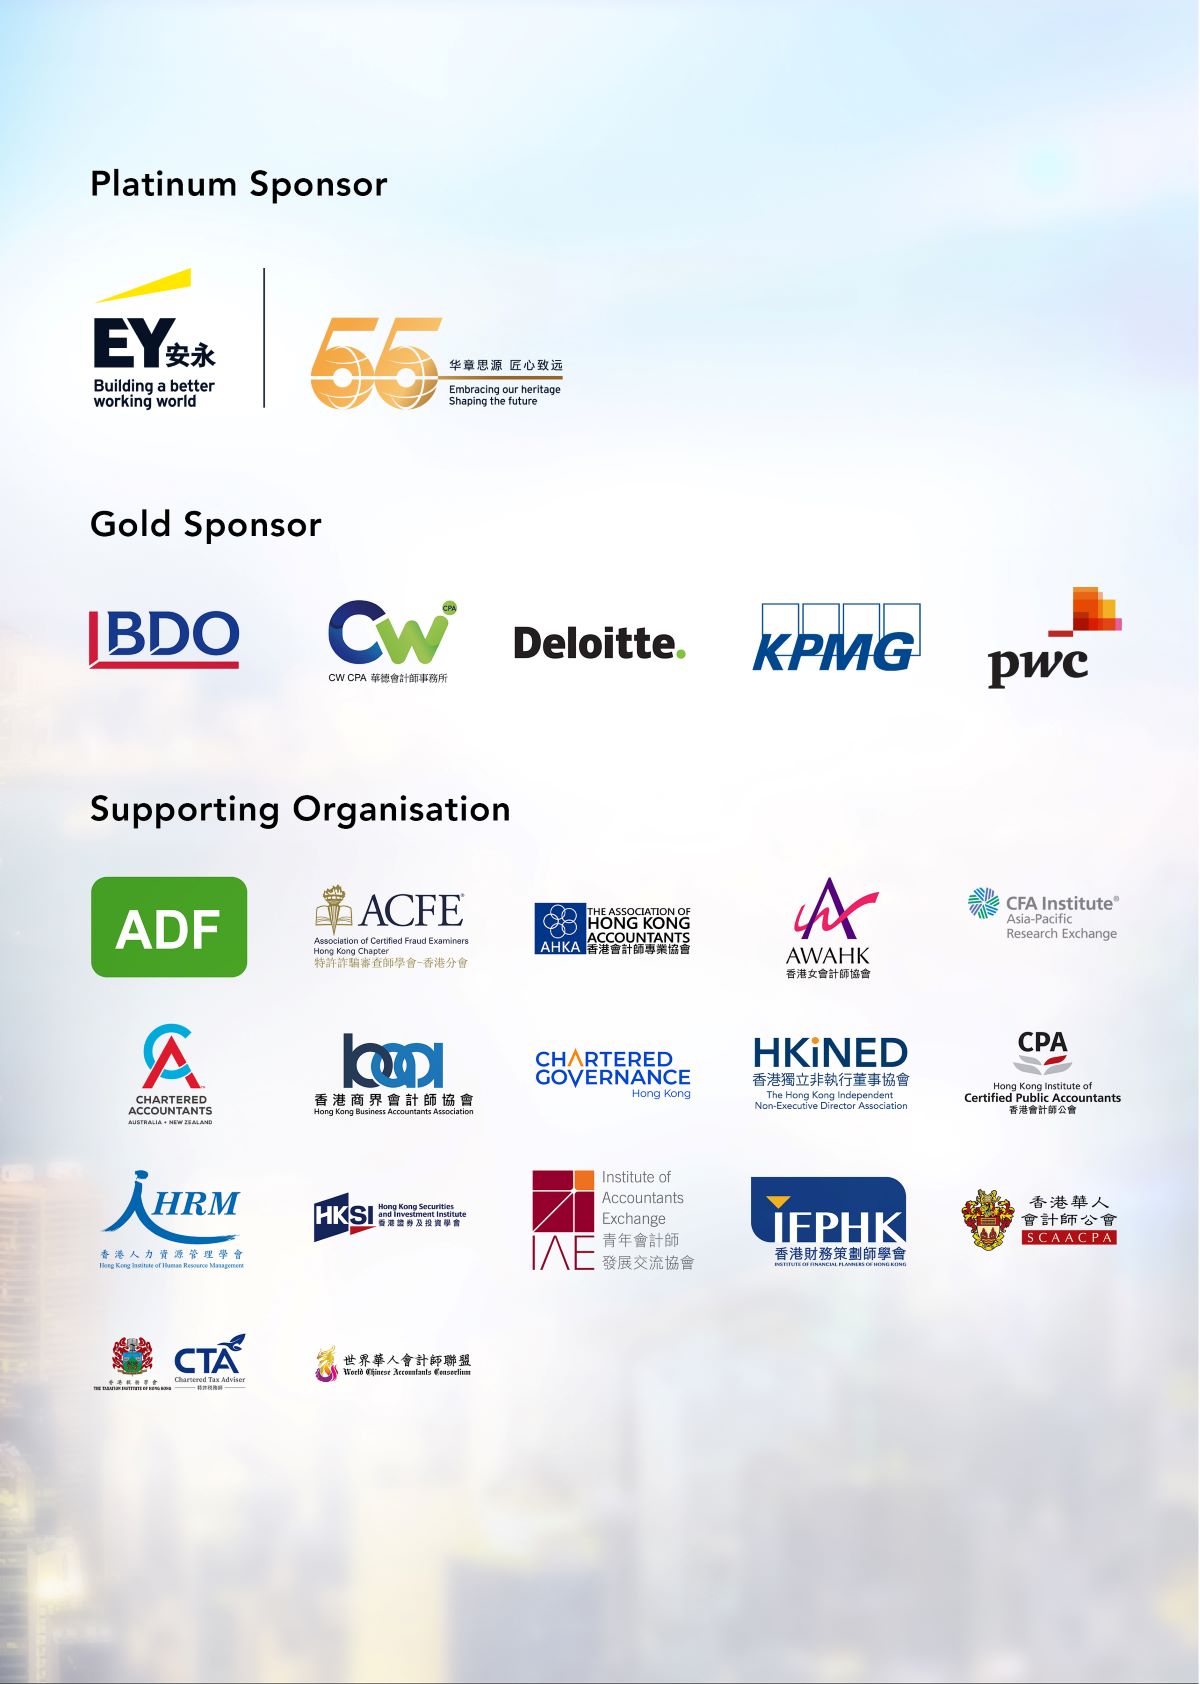 Sponsors and supporting orgs